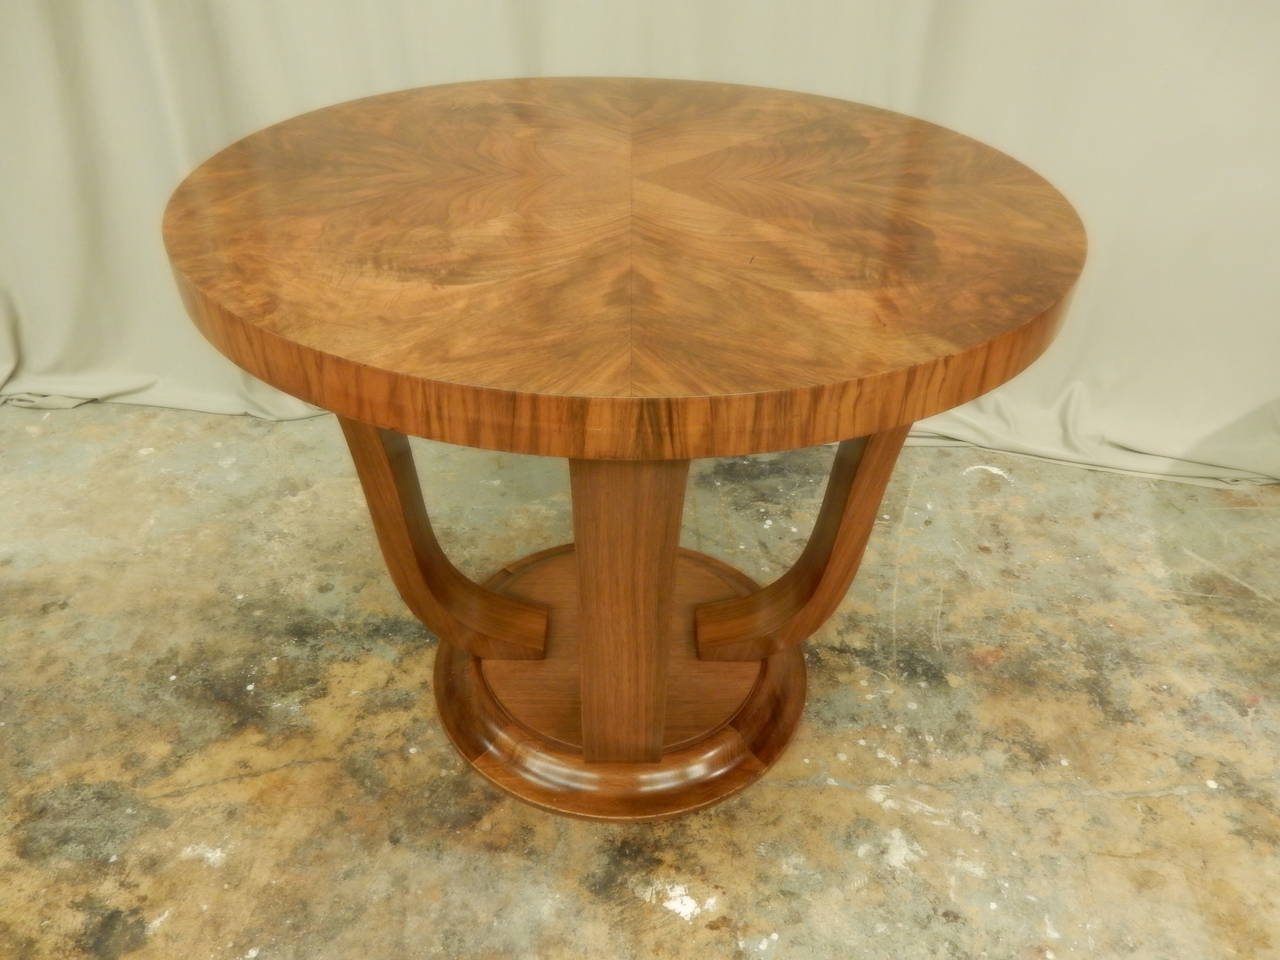 French Art Deco walnut side table with beautiful matching table top veneers.
Carefully restored with a lovely warm patina.